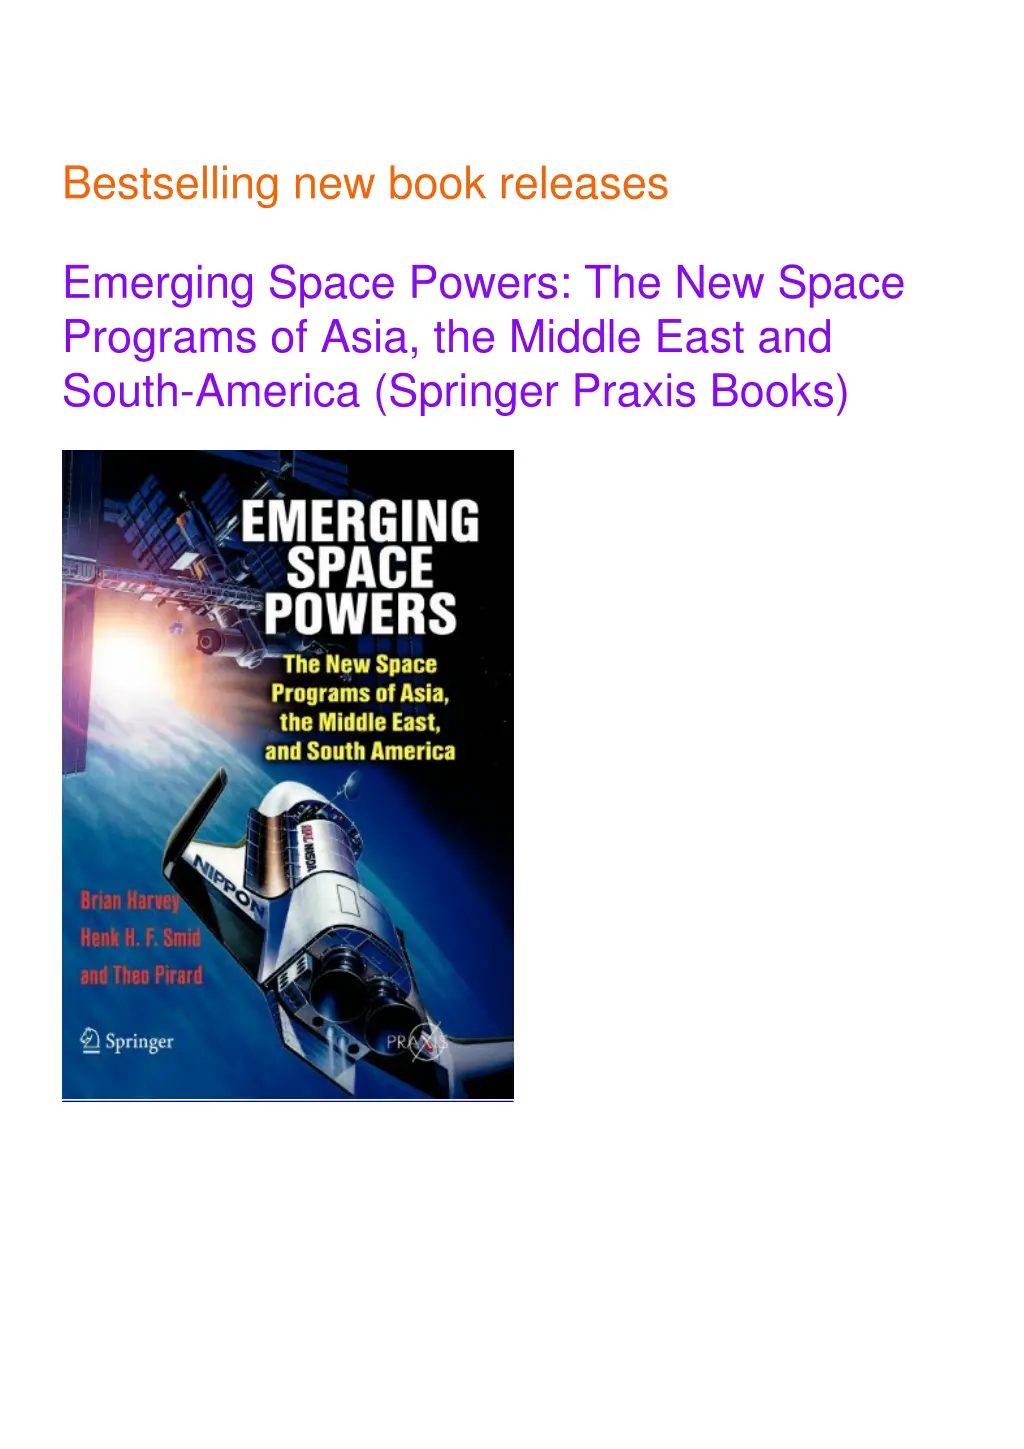 bestselling new book releases emerging space